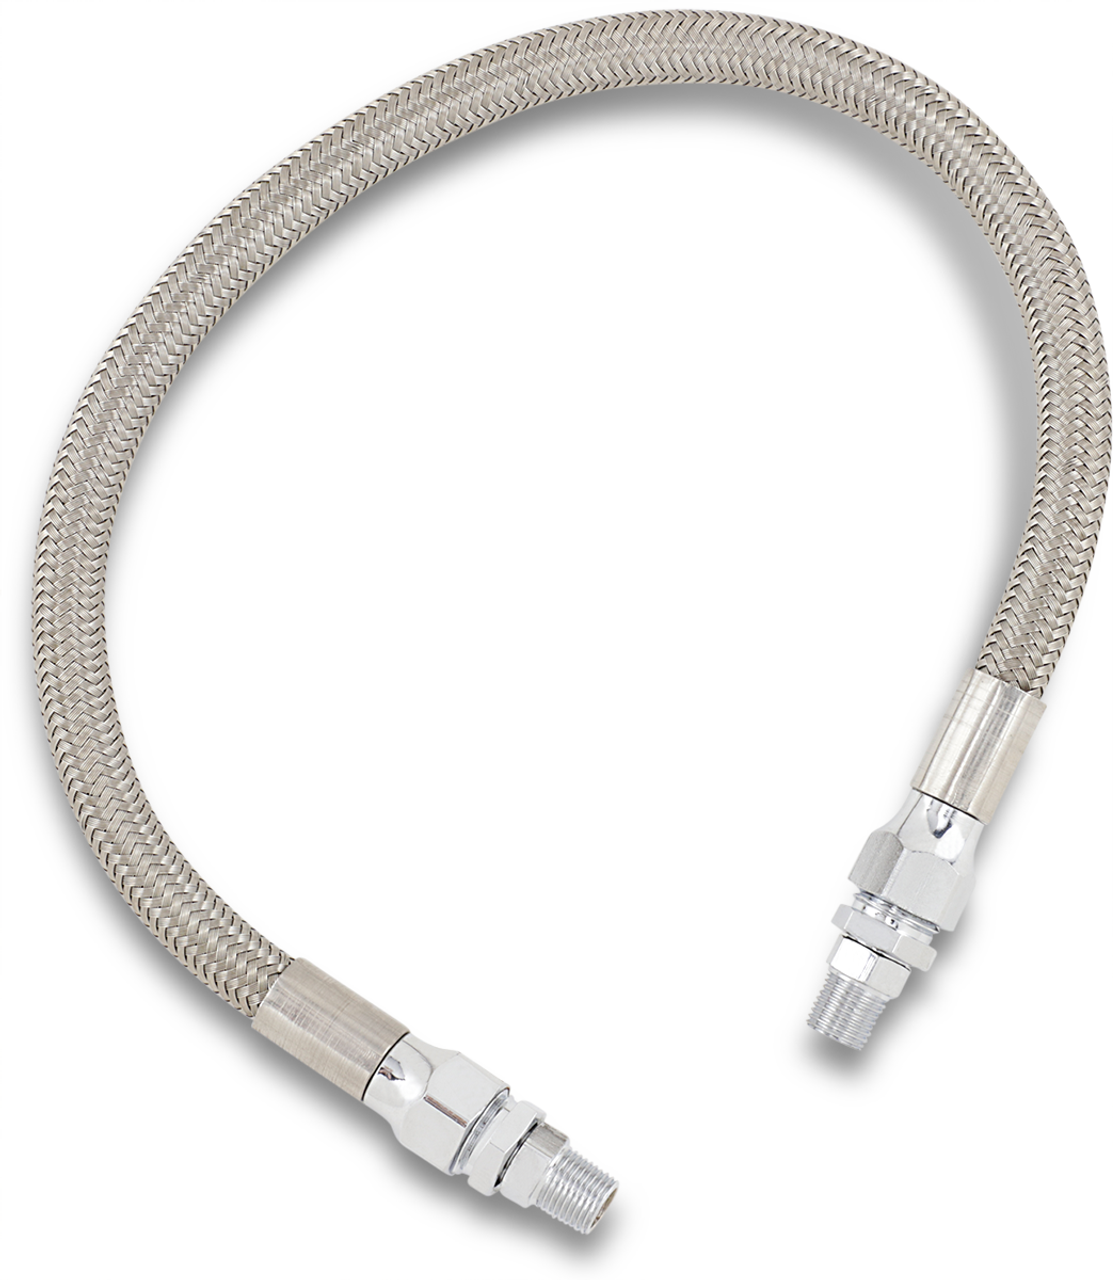 Oil Line with Fittings - Stainless Steel - 16"